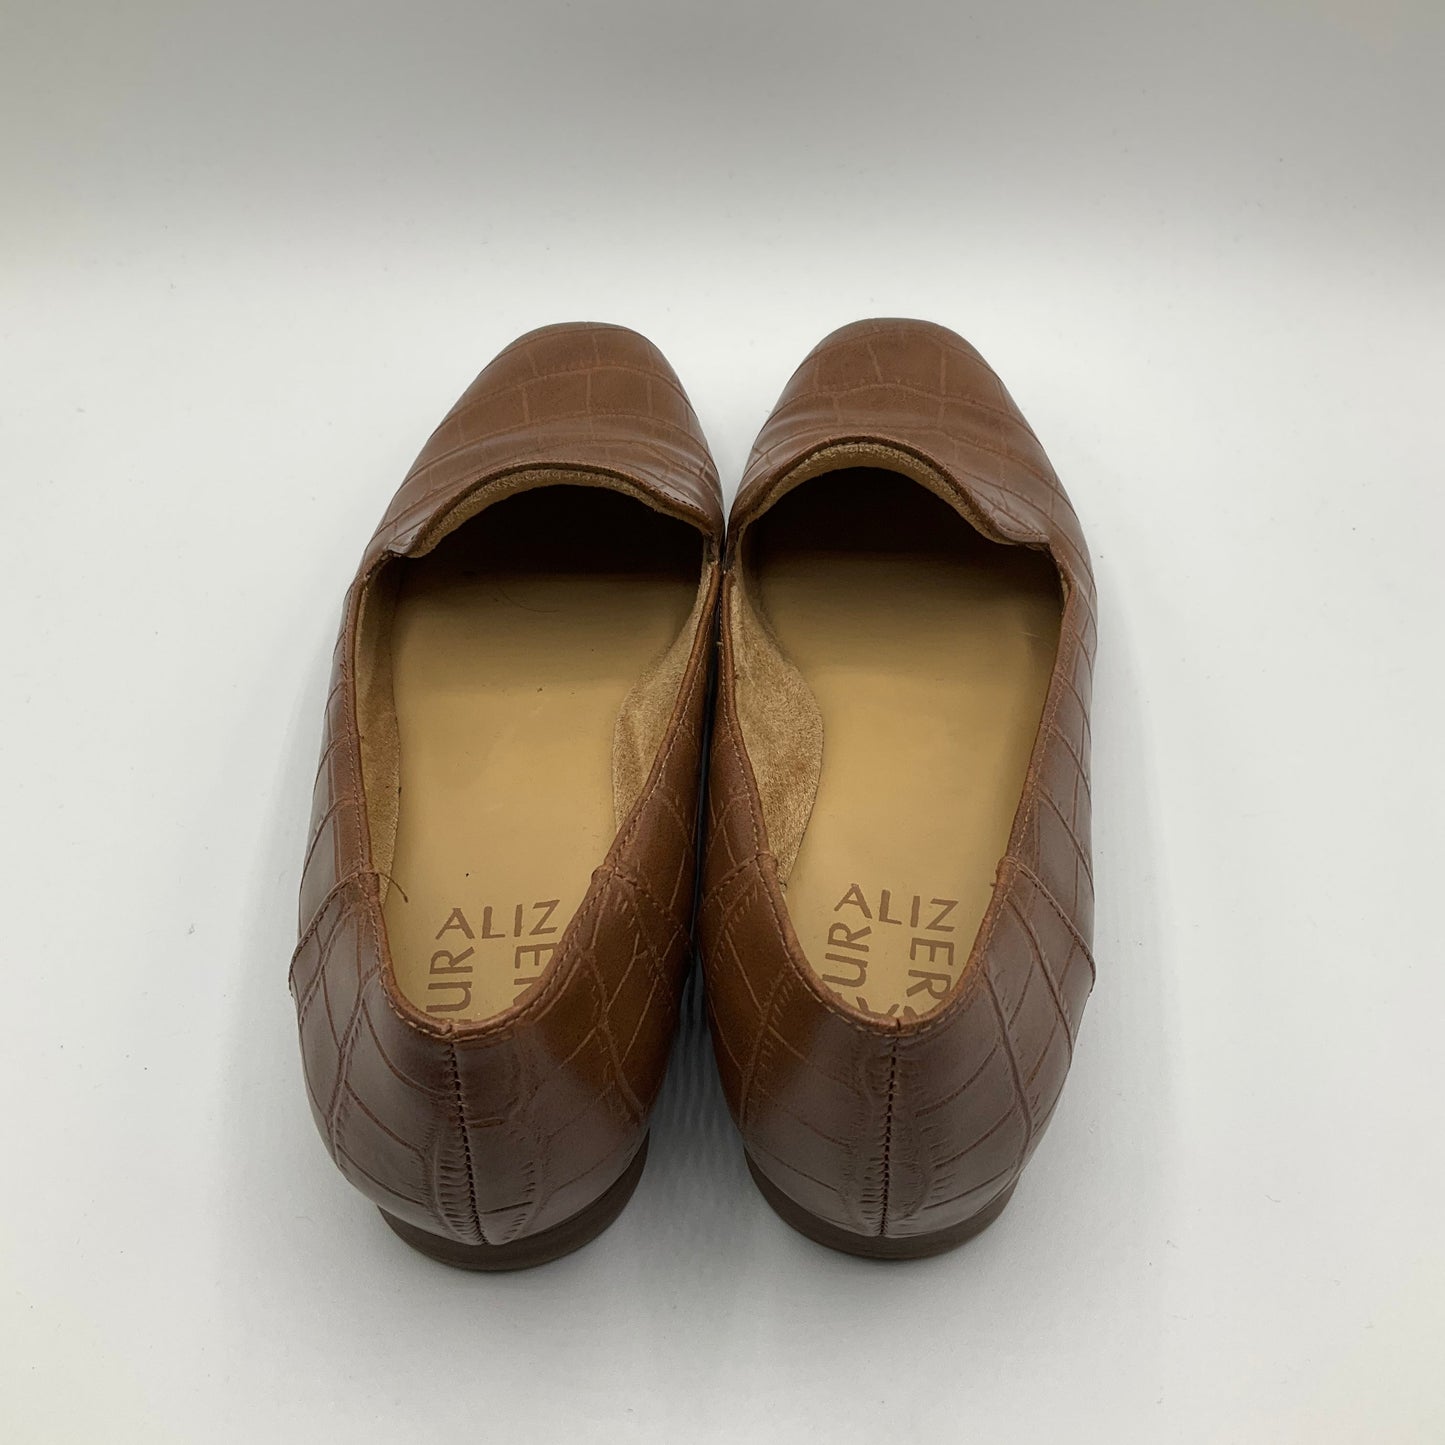 Brown Shoes Flats Clothes Mentor, Size 6